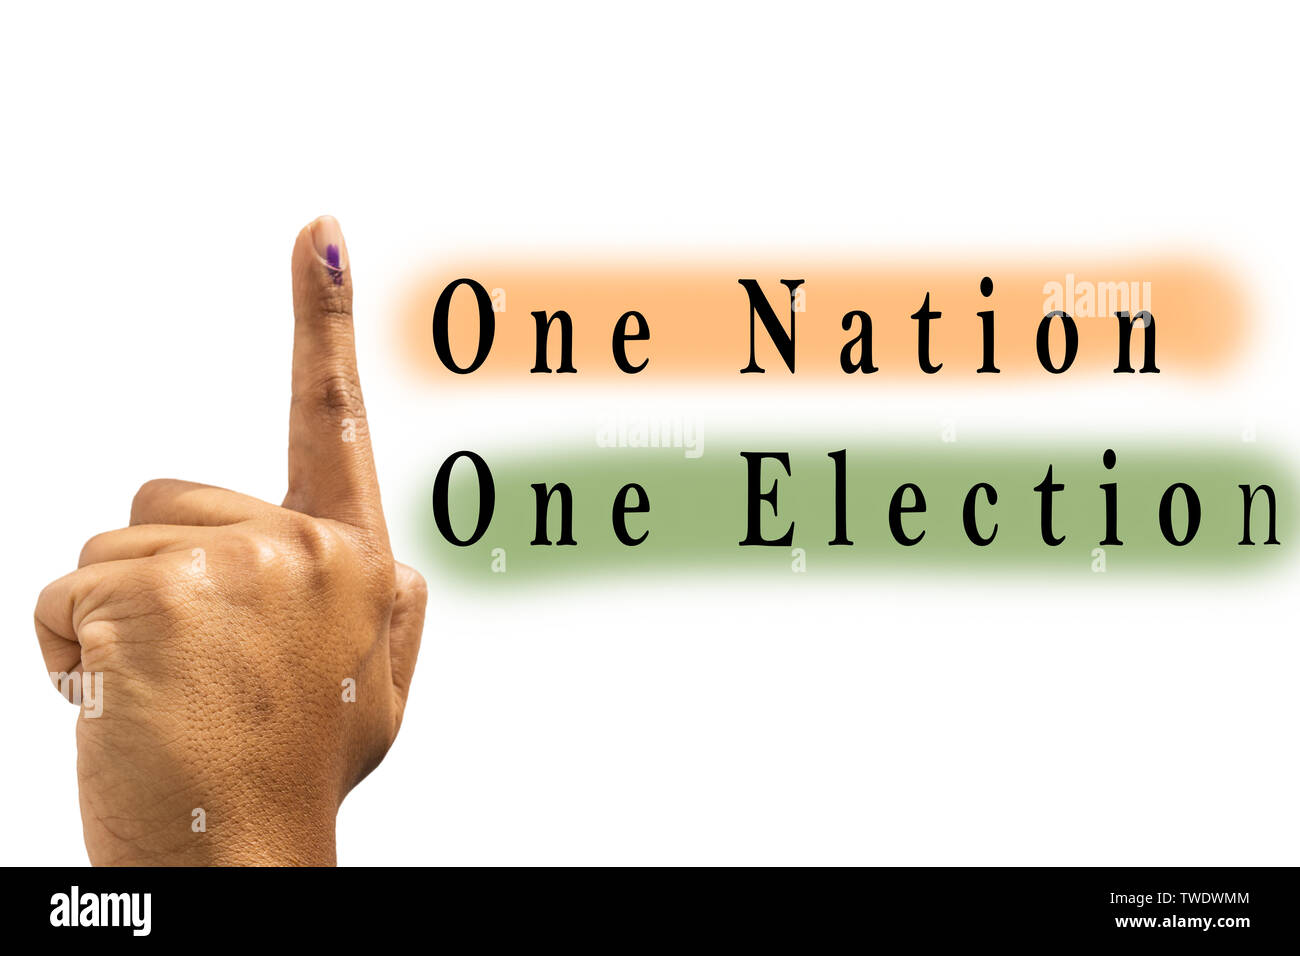 One Nation One Election with hand gesture of Indian Election on Isolated background. Stock Photo